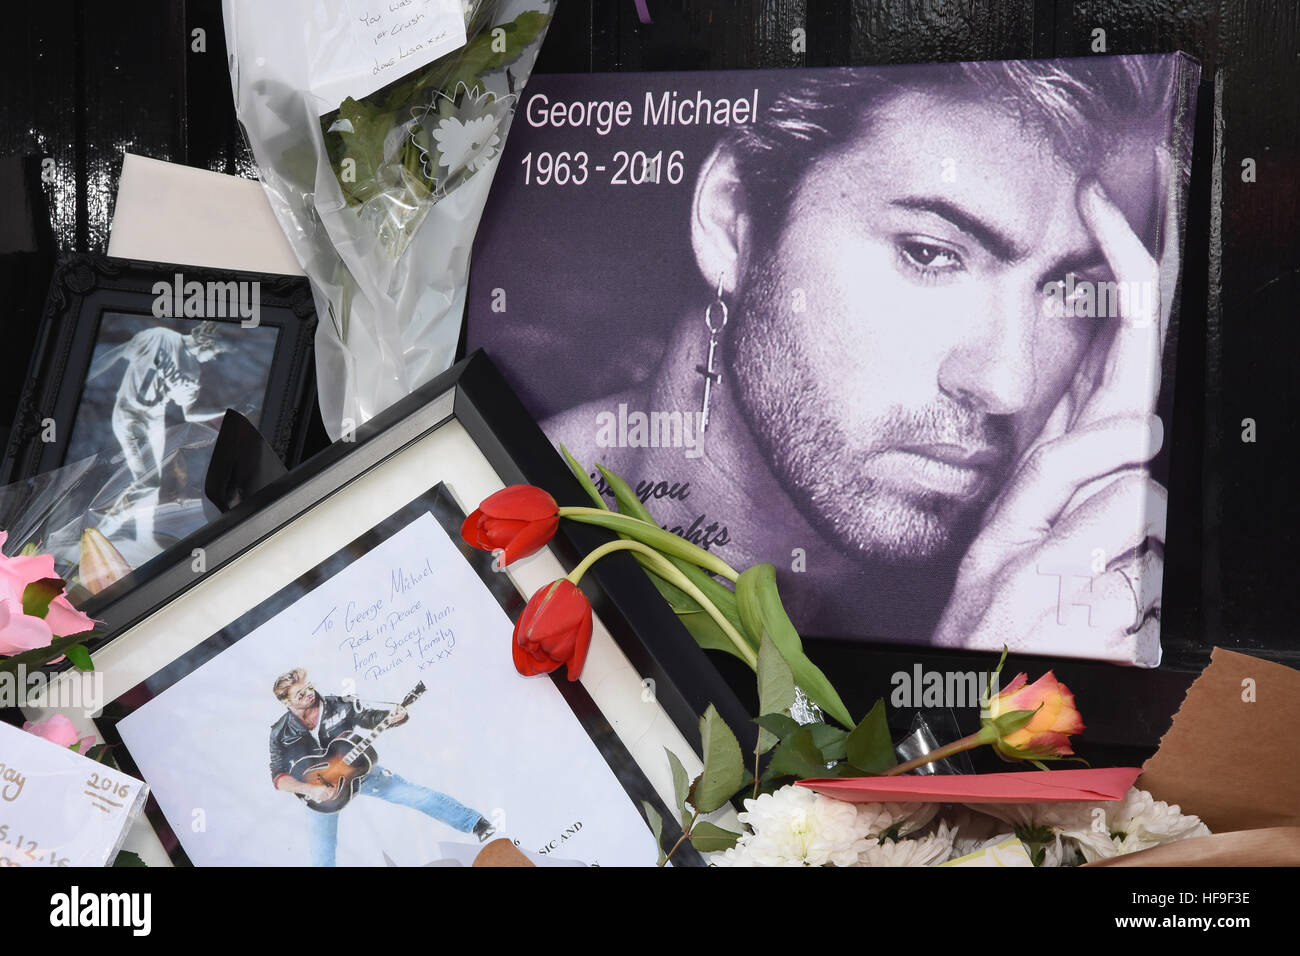 Floral tributes to George Michael placed outside of his London home. Following his death on 25.12.16, The Grove, Highgate, London UK Stock Photo